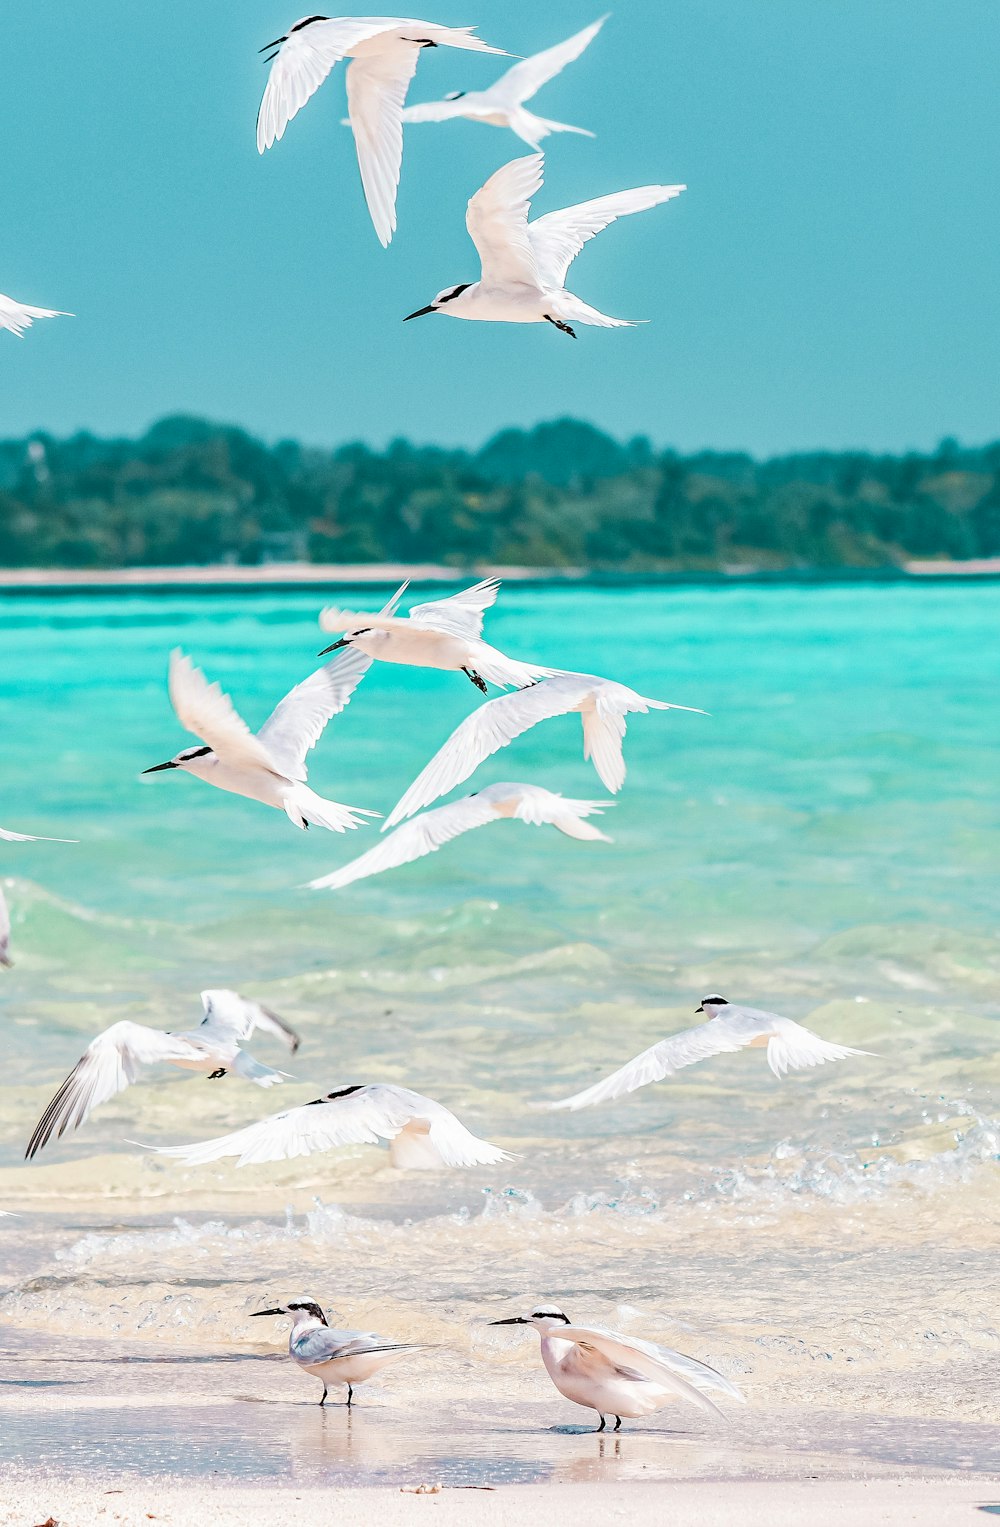 a flock of seagulls flying over a beach